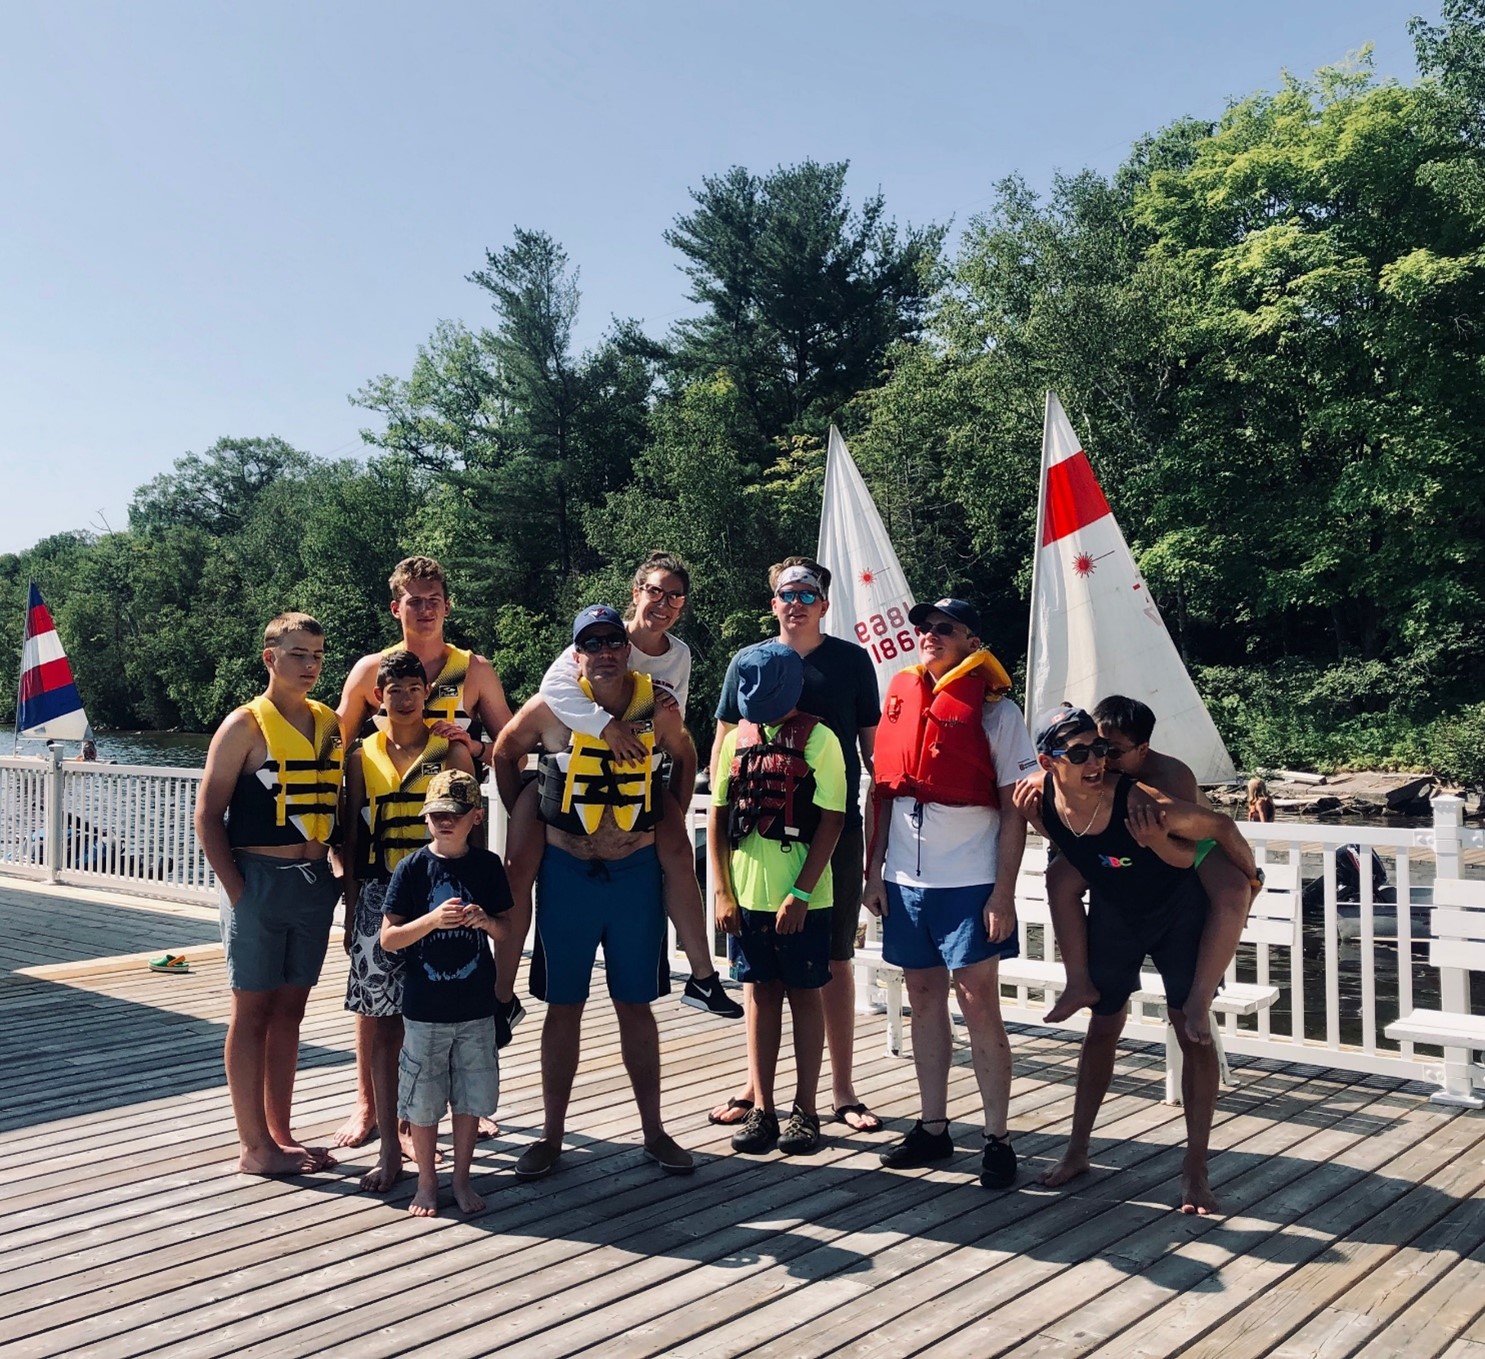 A small group of people standing on the dock in shorts and life jackets. They are smiling and, in some cases, piggy-backing others